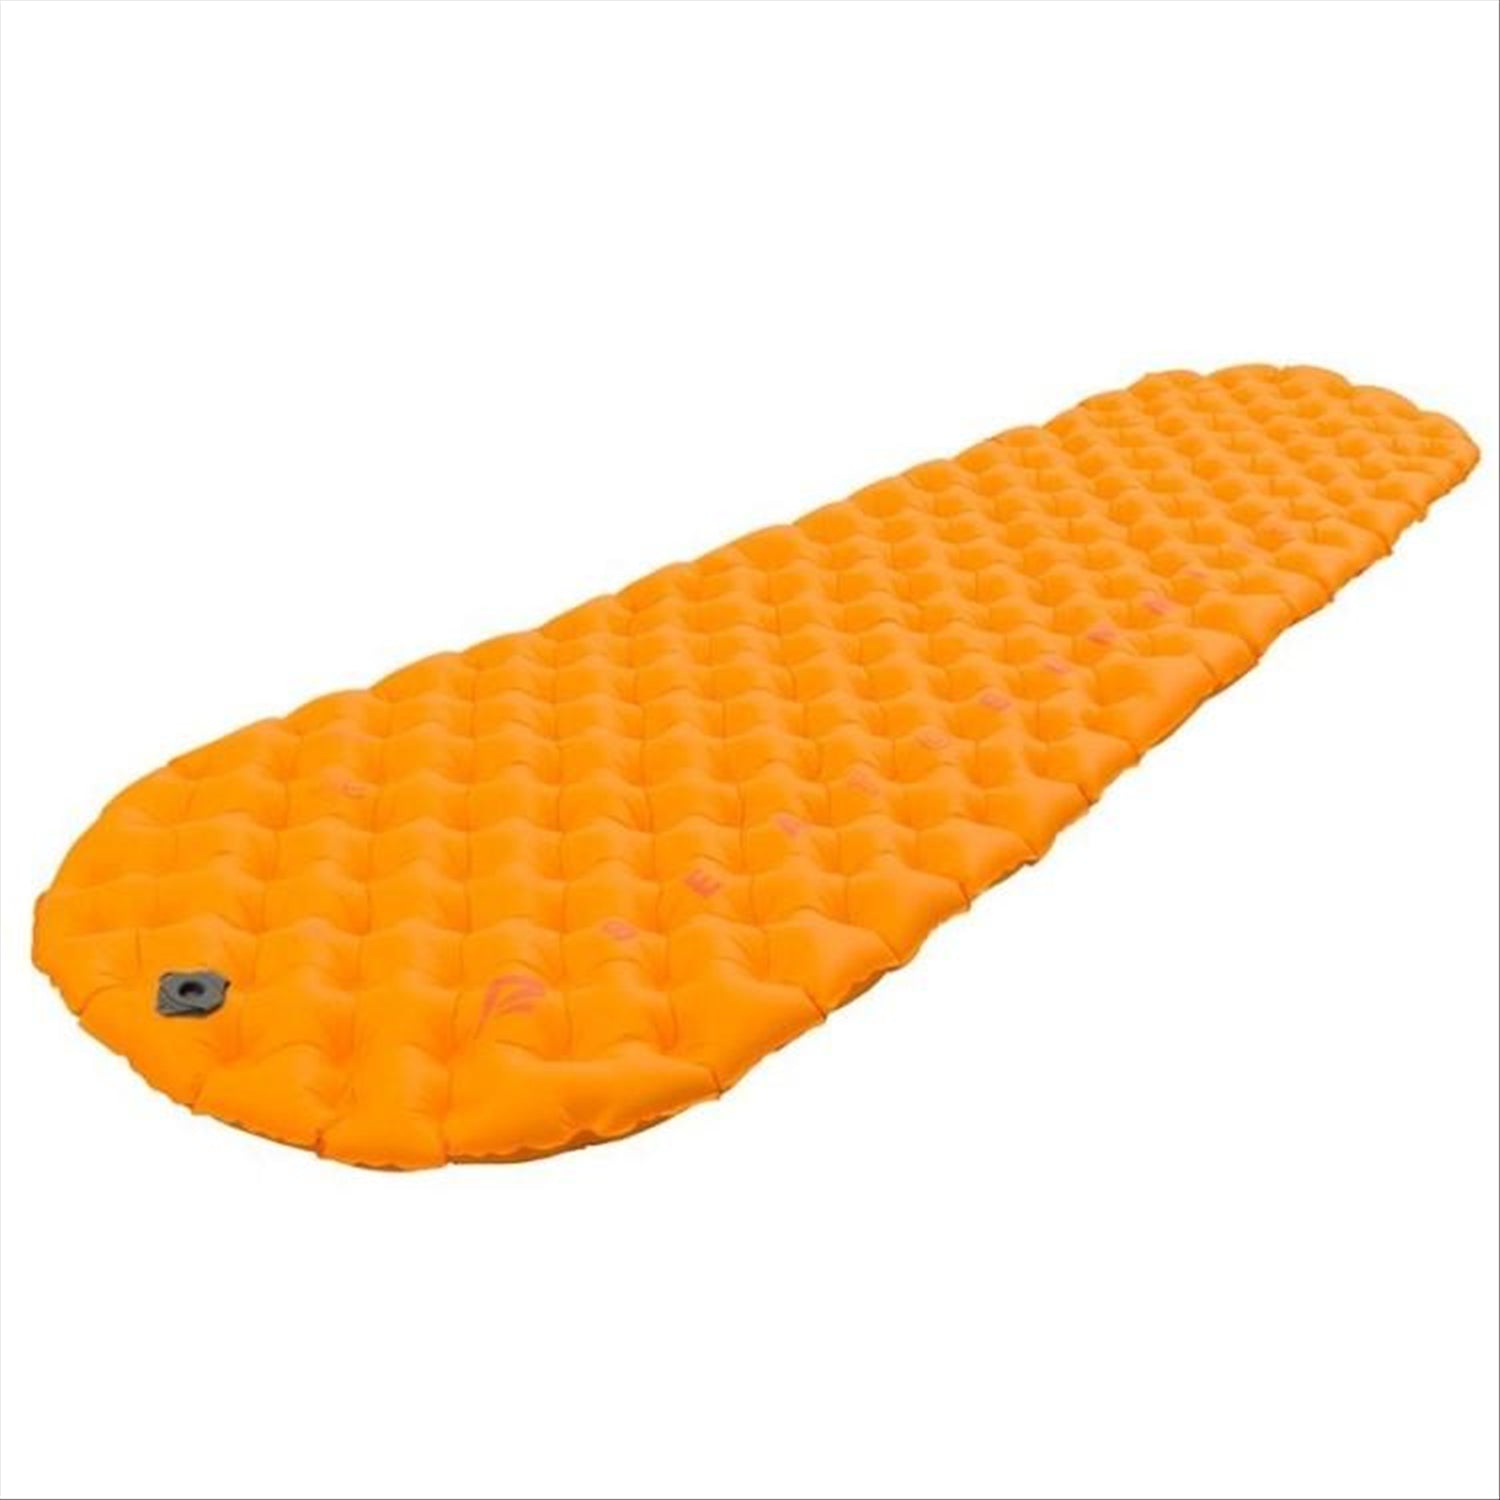 Sea to Summit Sea To Summit Insulated Ultralight Air Mat, R-Value 3.1